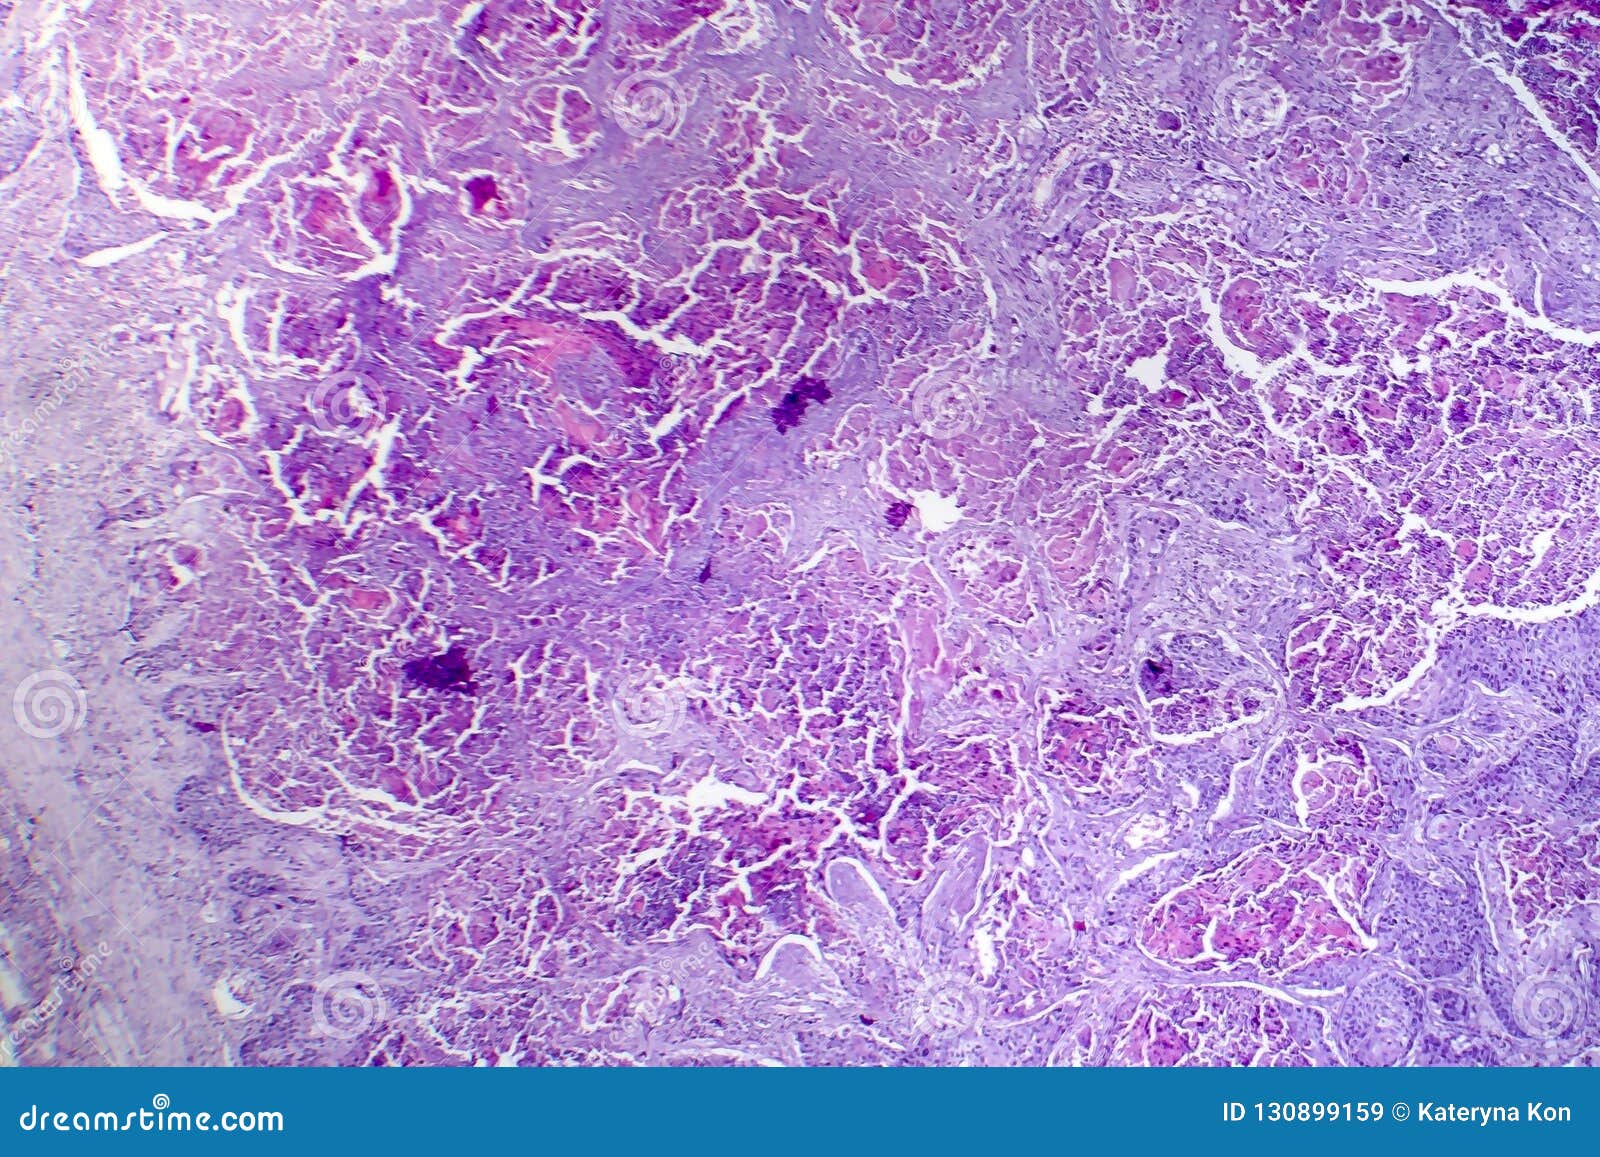 Squamous Cell Carcinoma Of The Lung Stock Image Image of